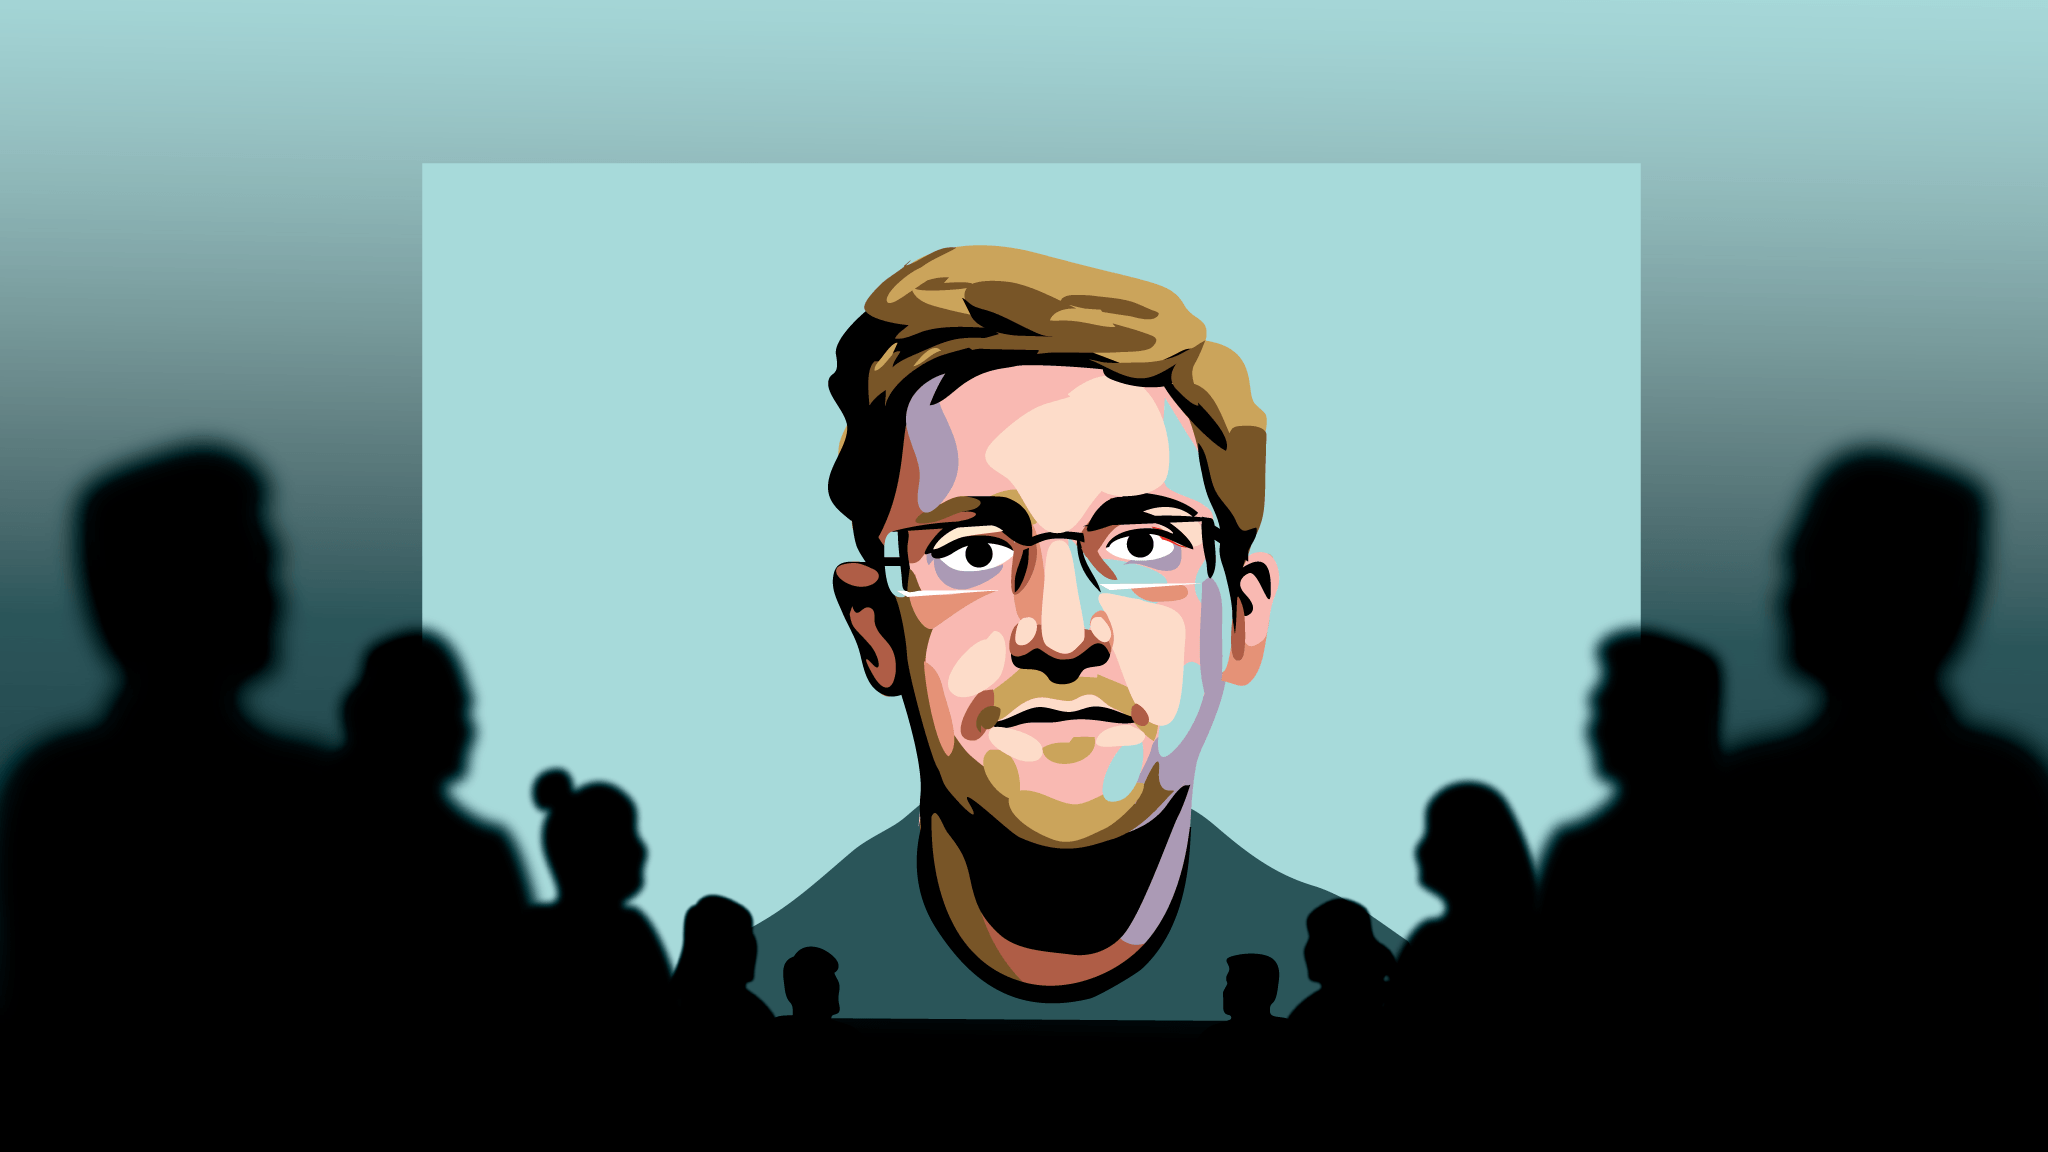 Edward Snowden and the millennial conscience